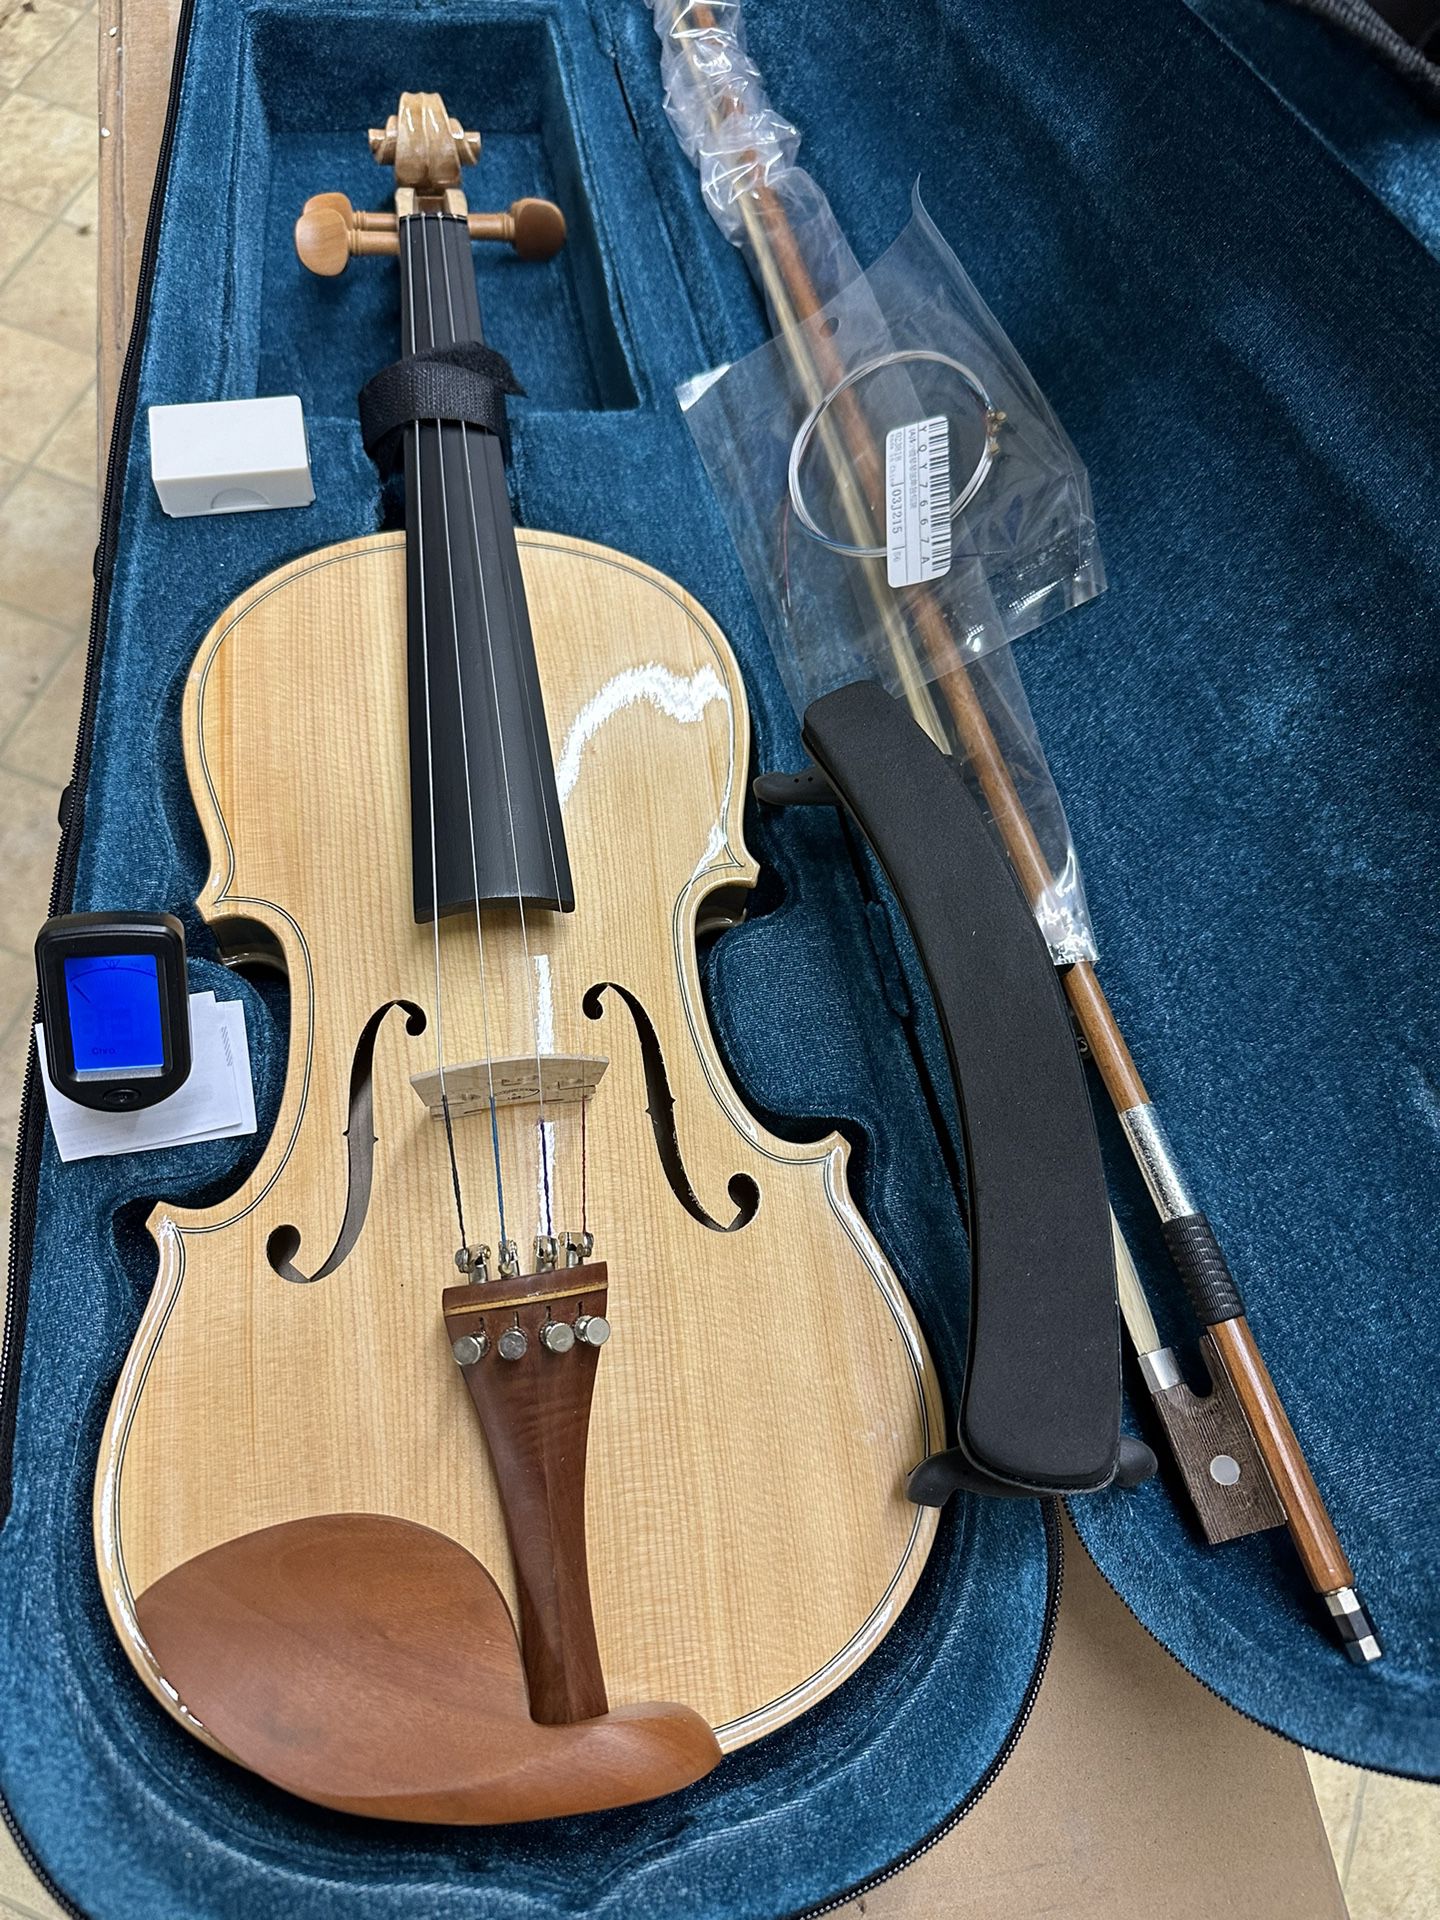 Beautiful 4/4 Glossy Wood Violin with New Bow, Digital Tuner, Shoulder Rest $250 Firm